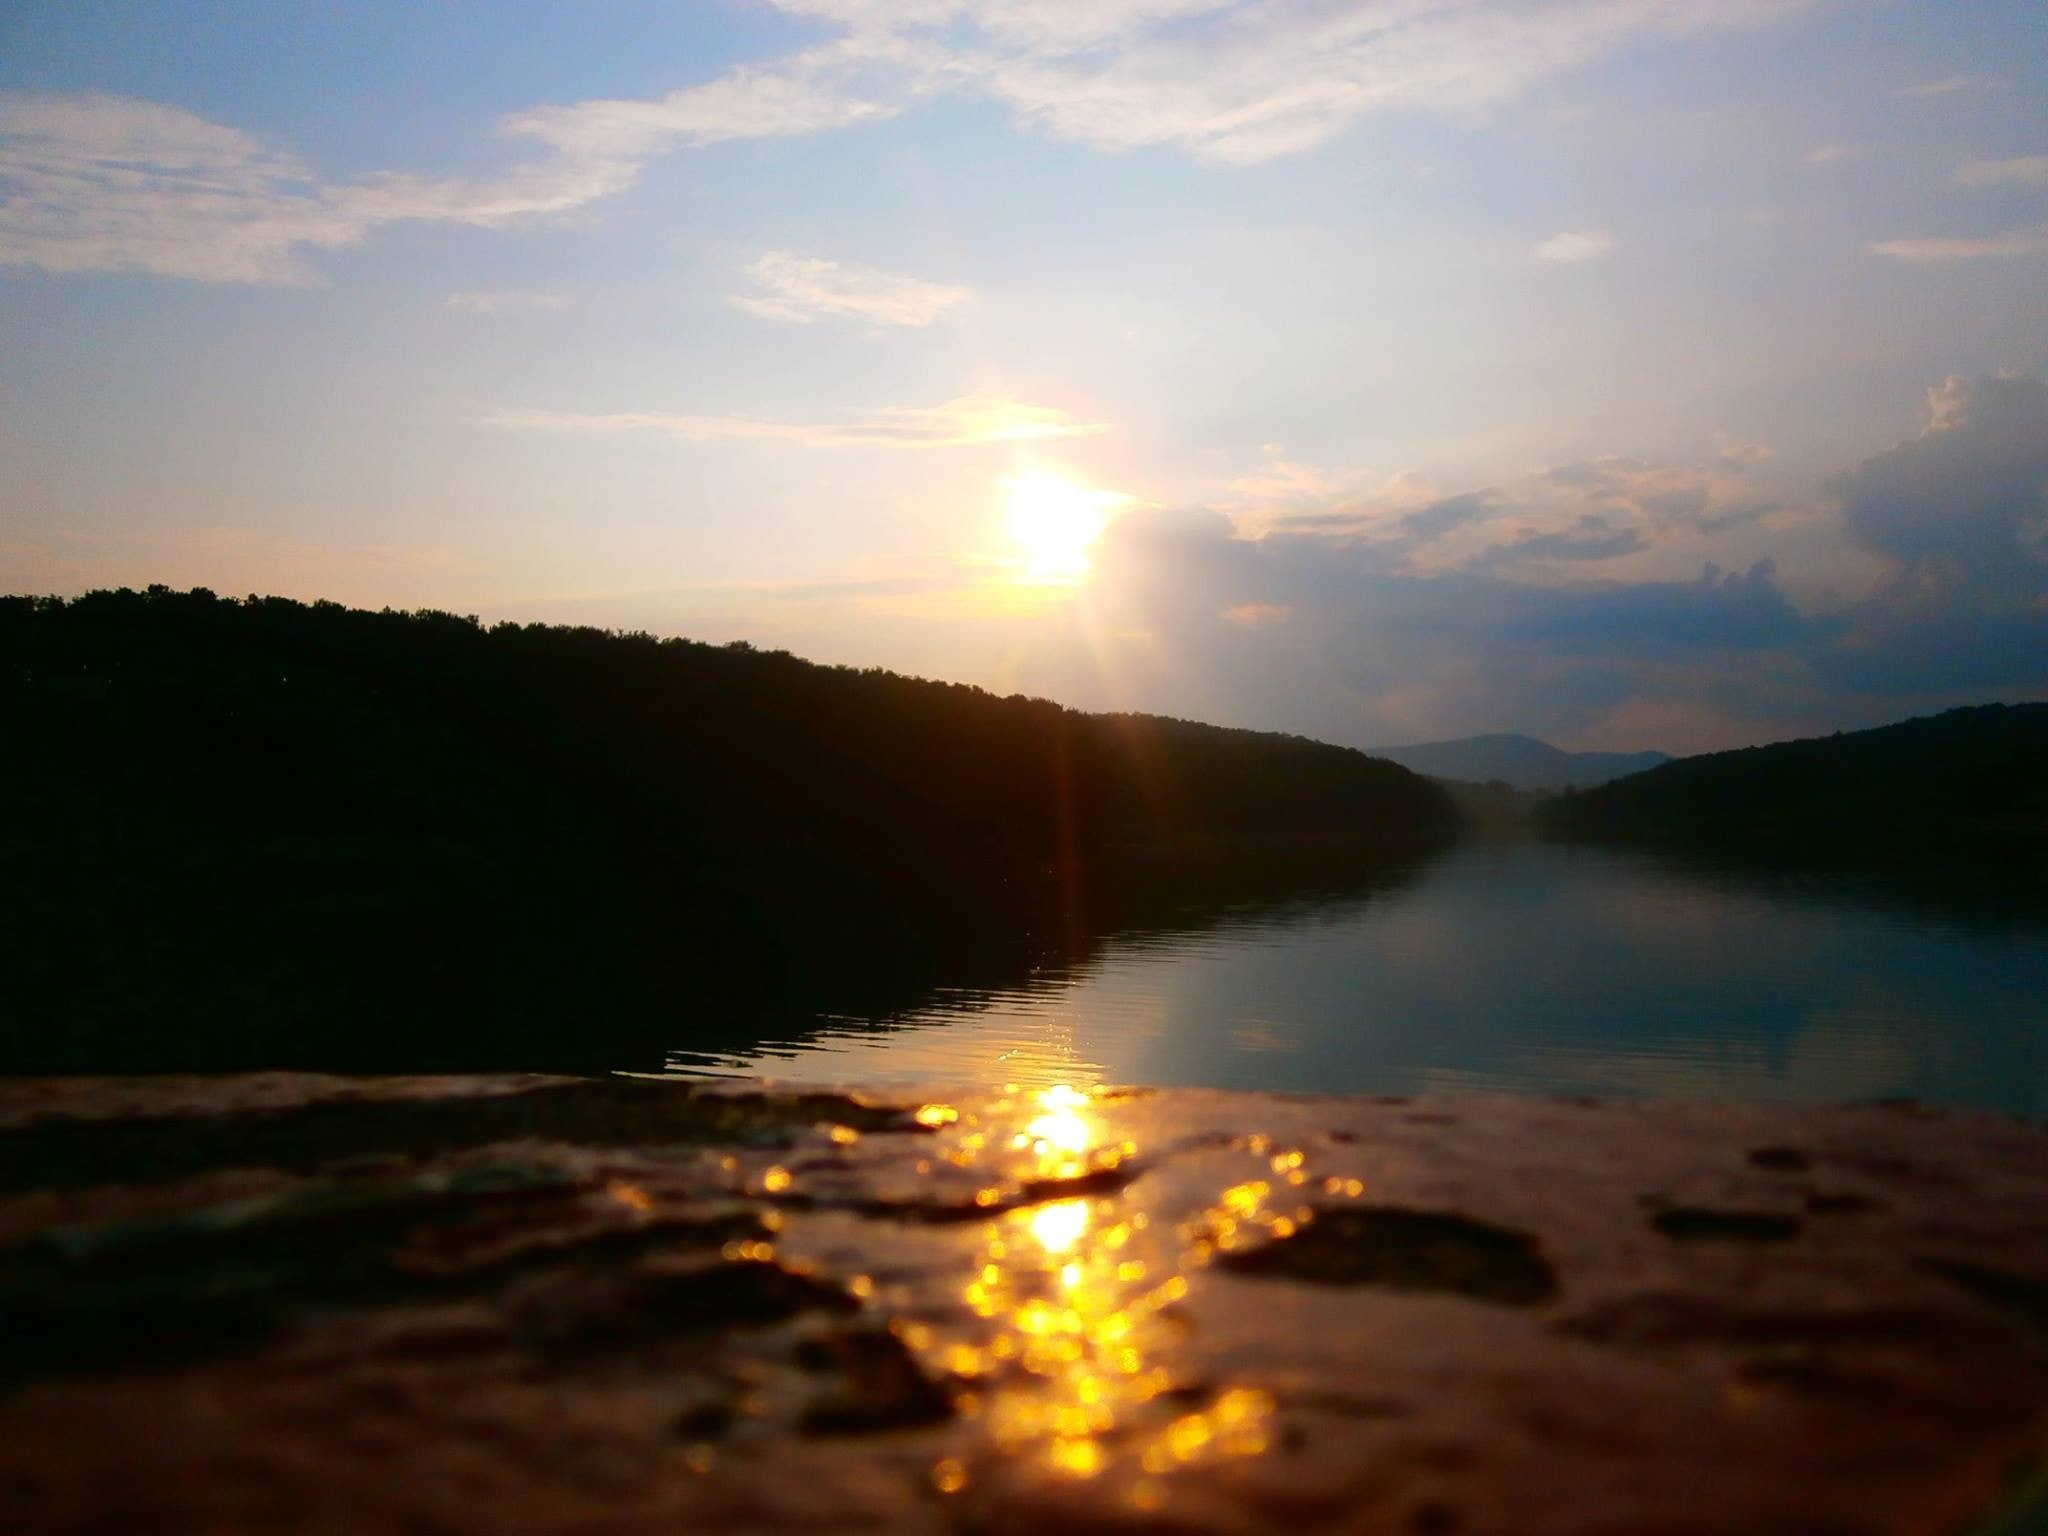 lake, sunset, Serbia, sky, water, scenics - nature, beauty in nature